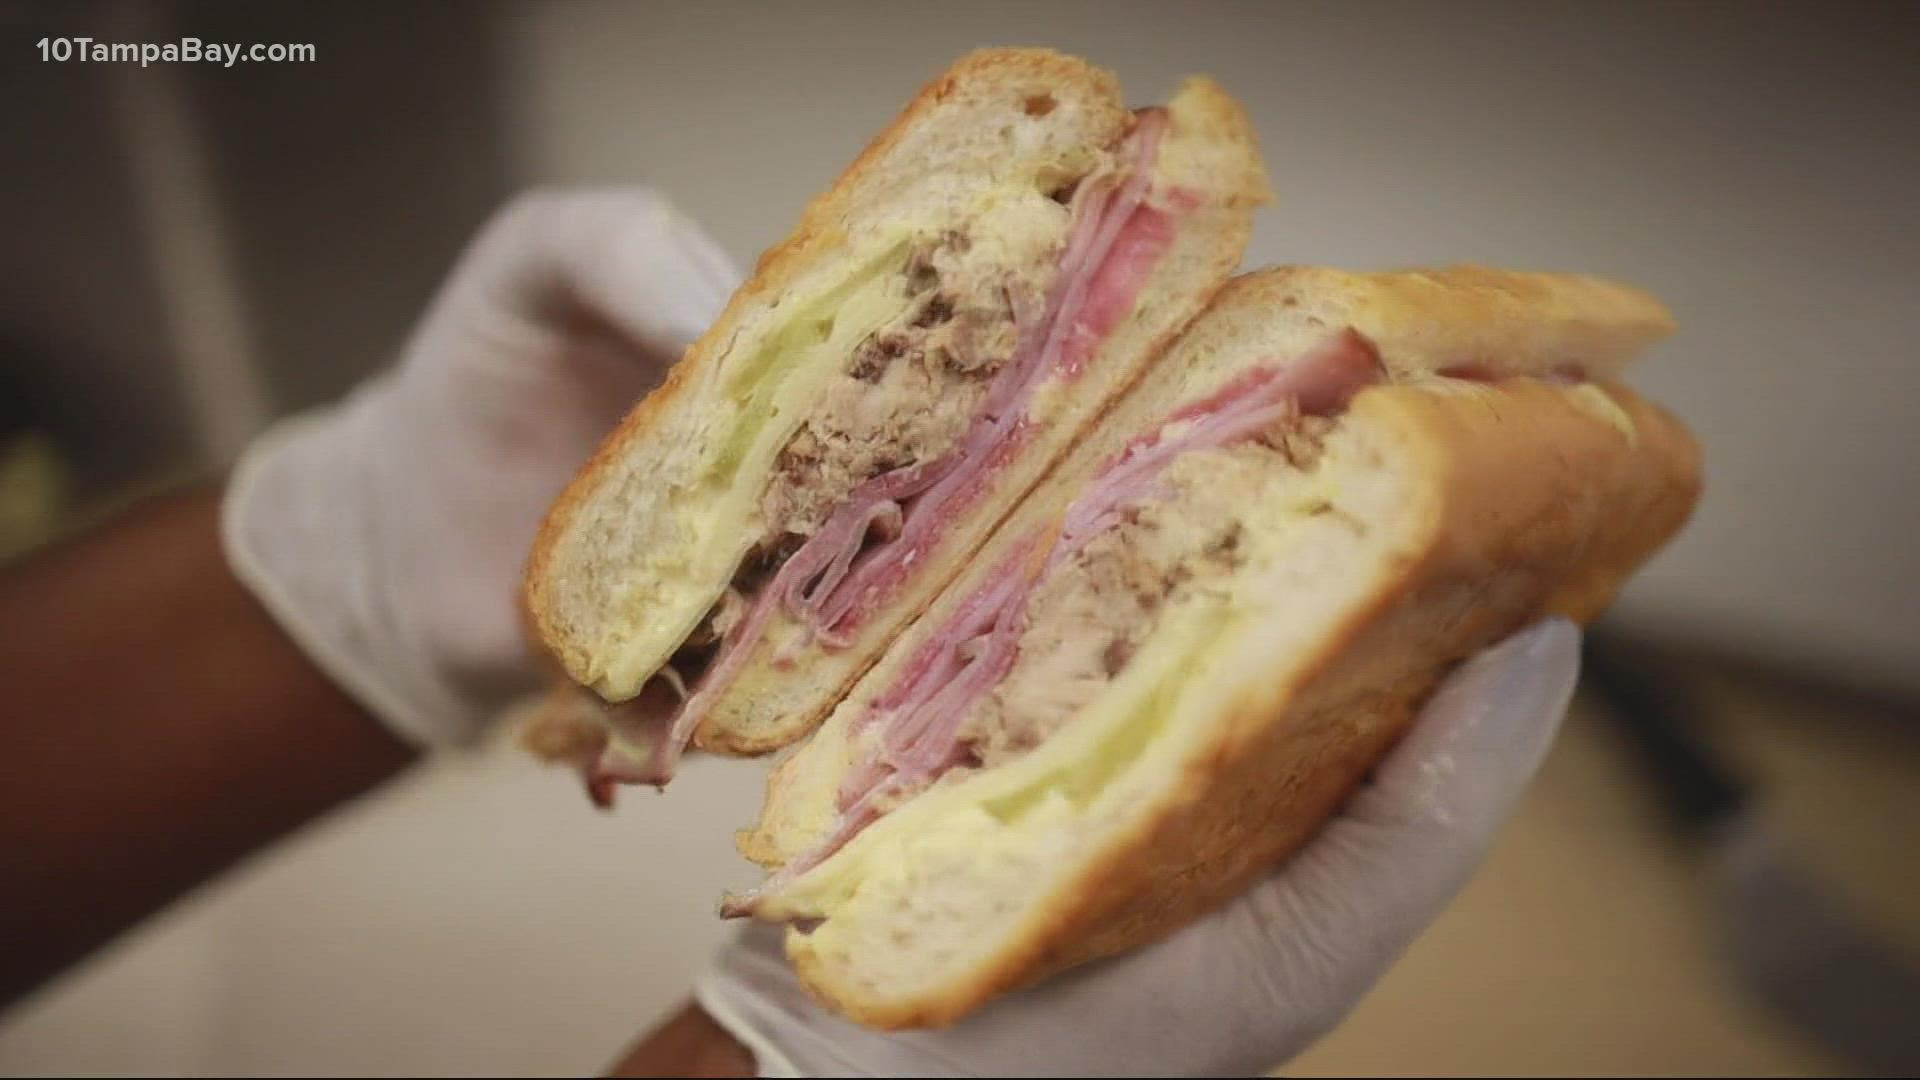 Now people on both sides of the Bay can enjoy fresh Cuban bread.